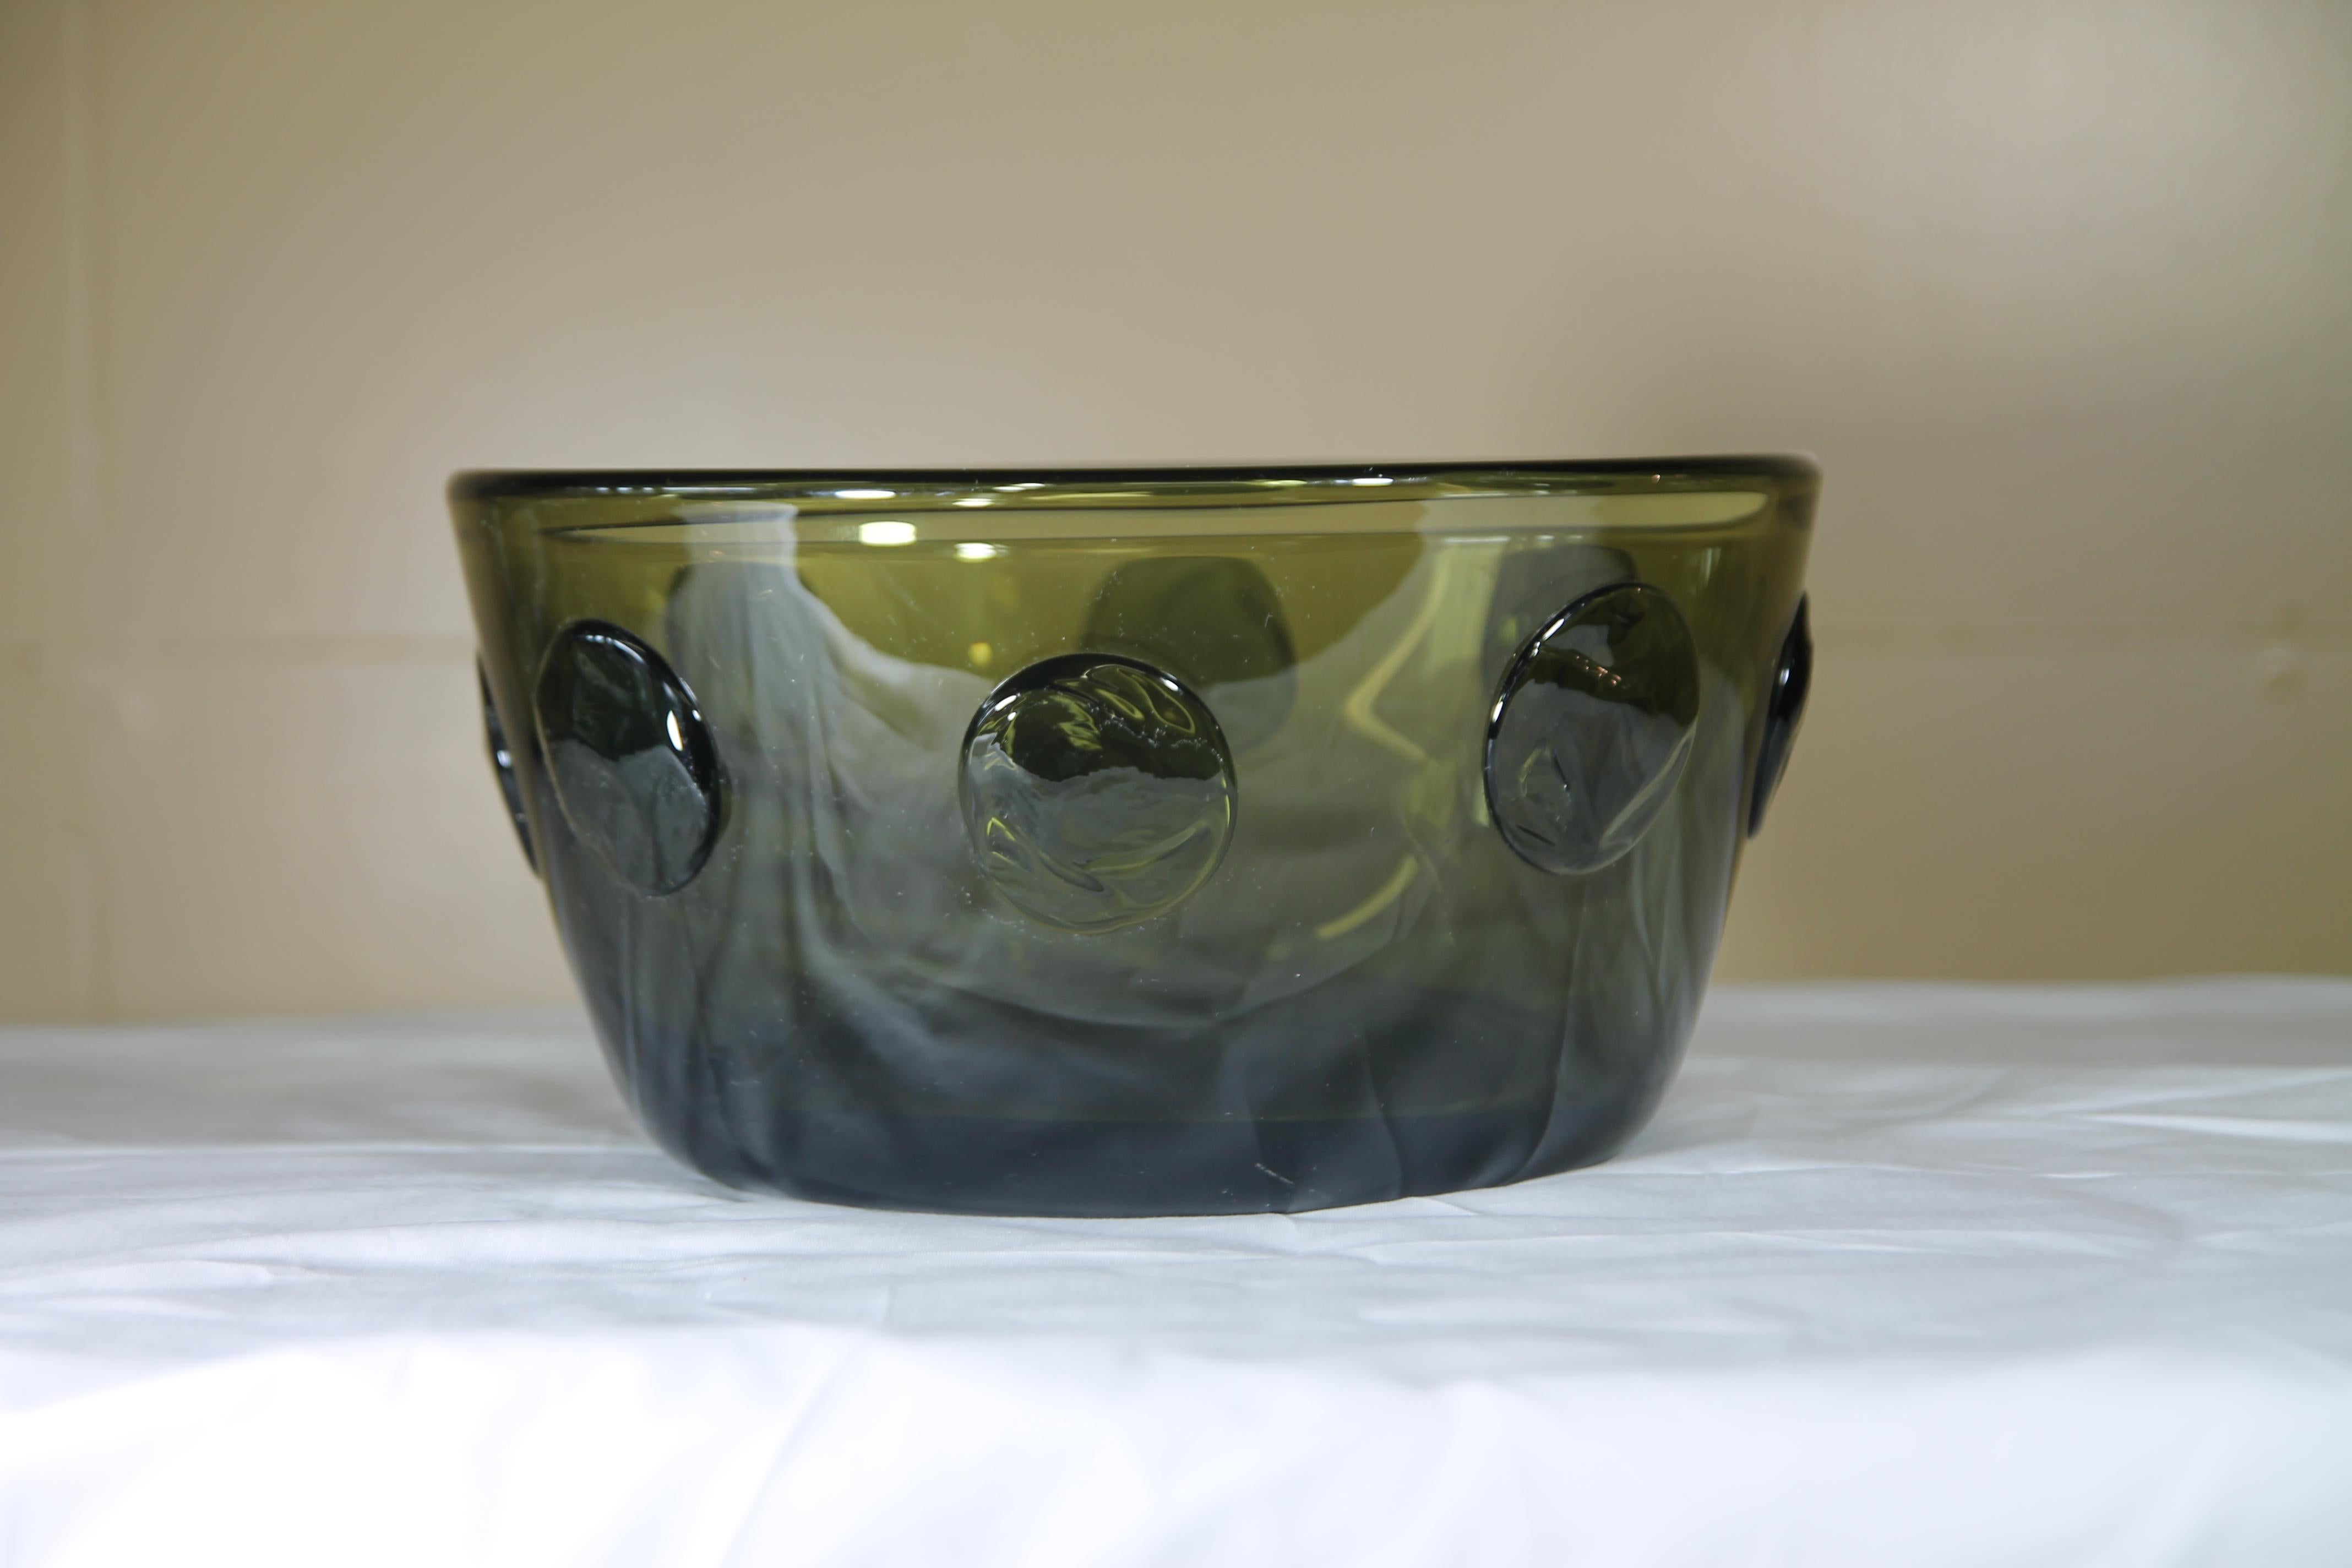 Severin Brody bowl. Larger size is rarely seen. Signed on the bottom of bowl.